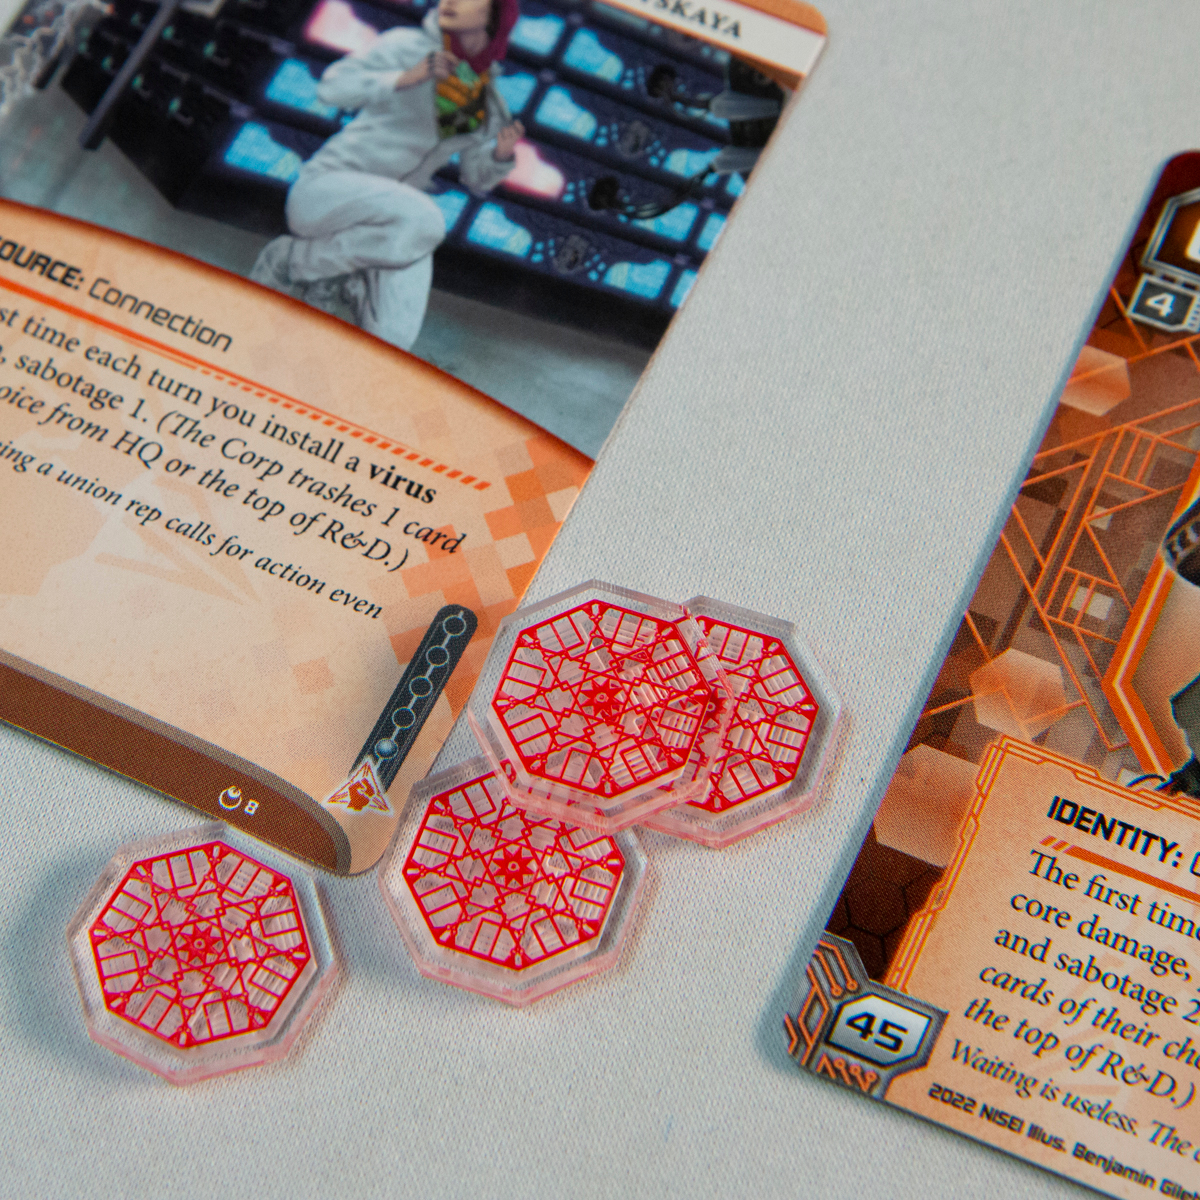 Three Virus Tokens from the Data Token set near two Anarch faction cards designed by Null Signal Games